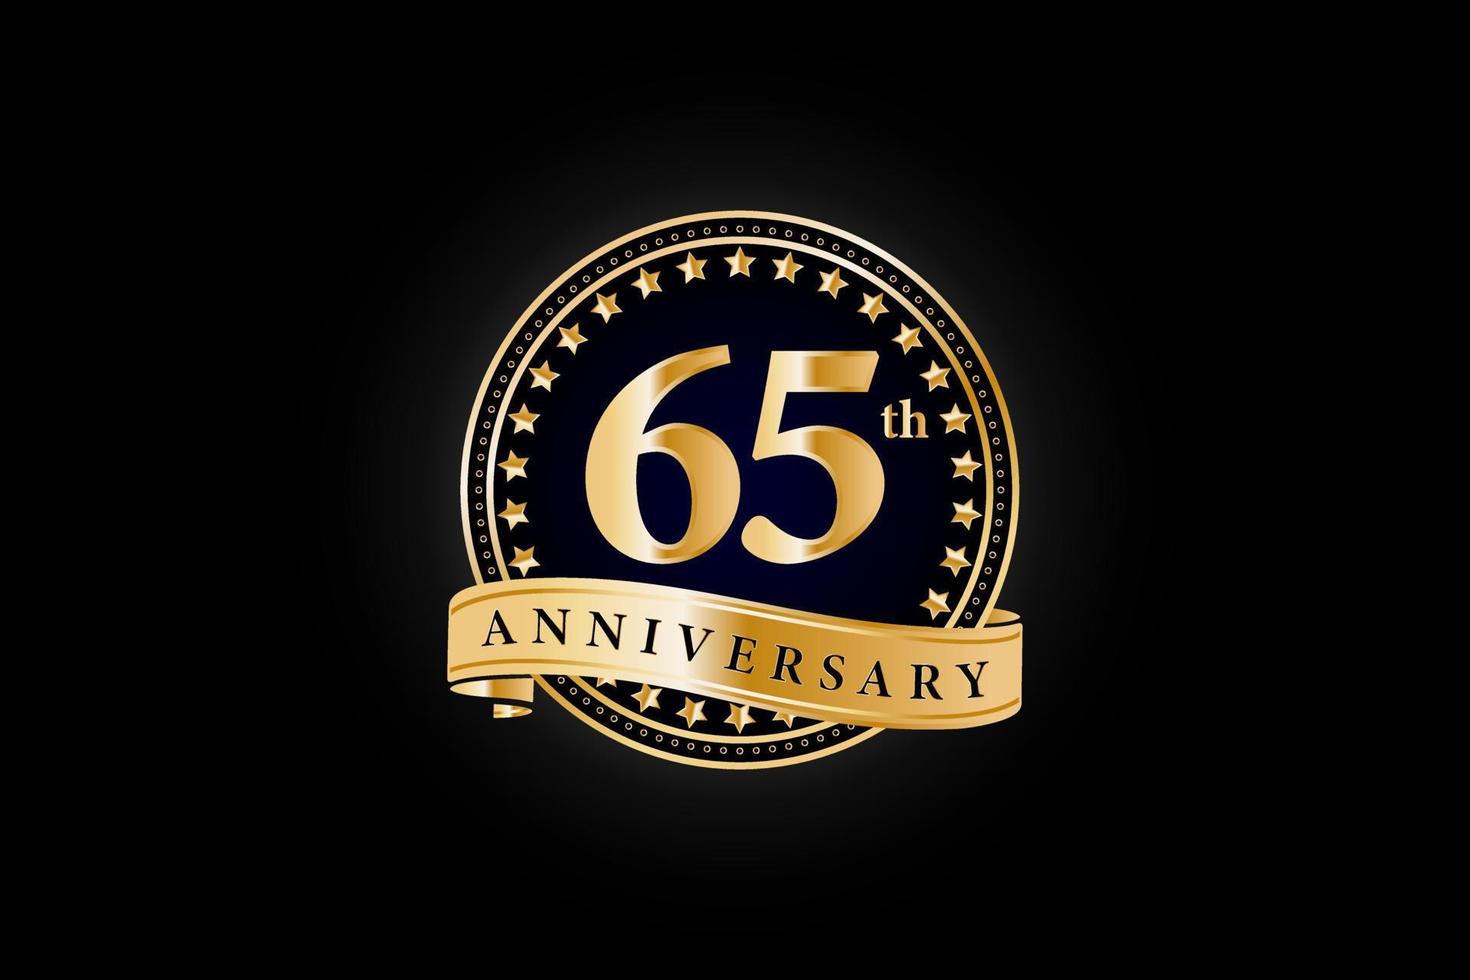 65th Anniversary golden gold logo with ring and gold ribbon isolated on black background, vector design for celebration.